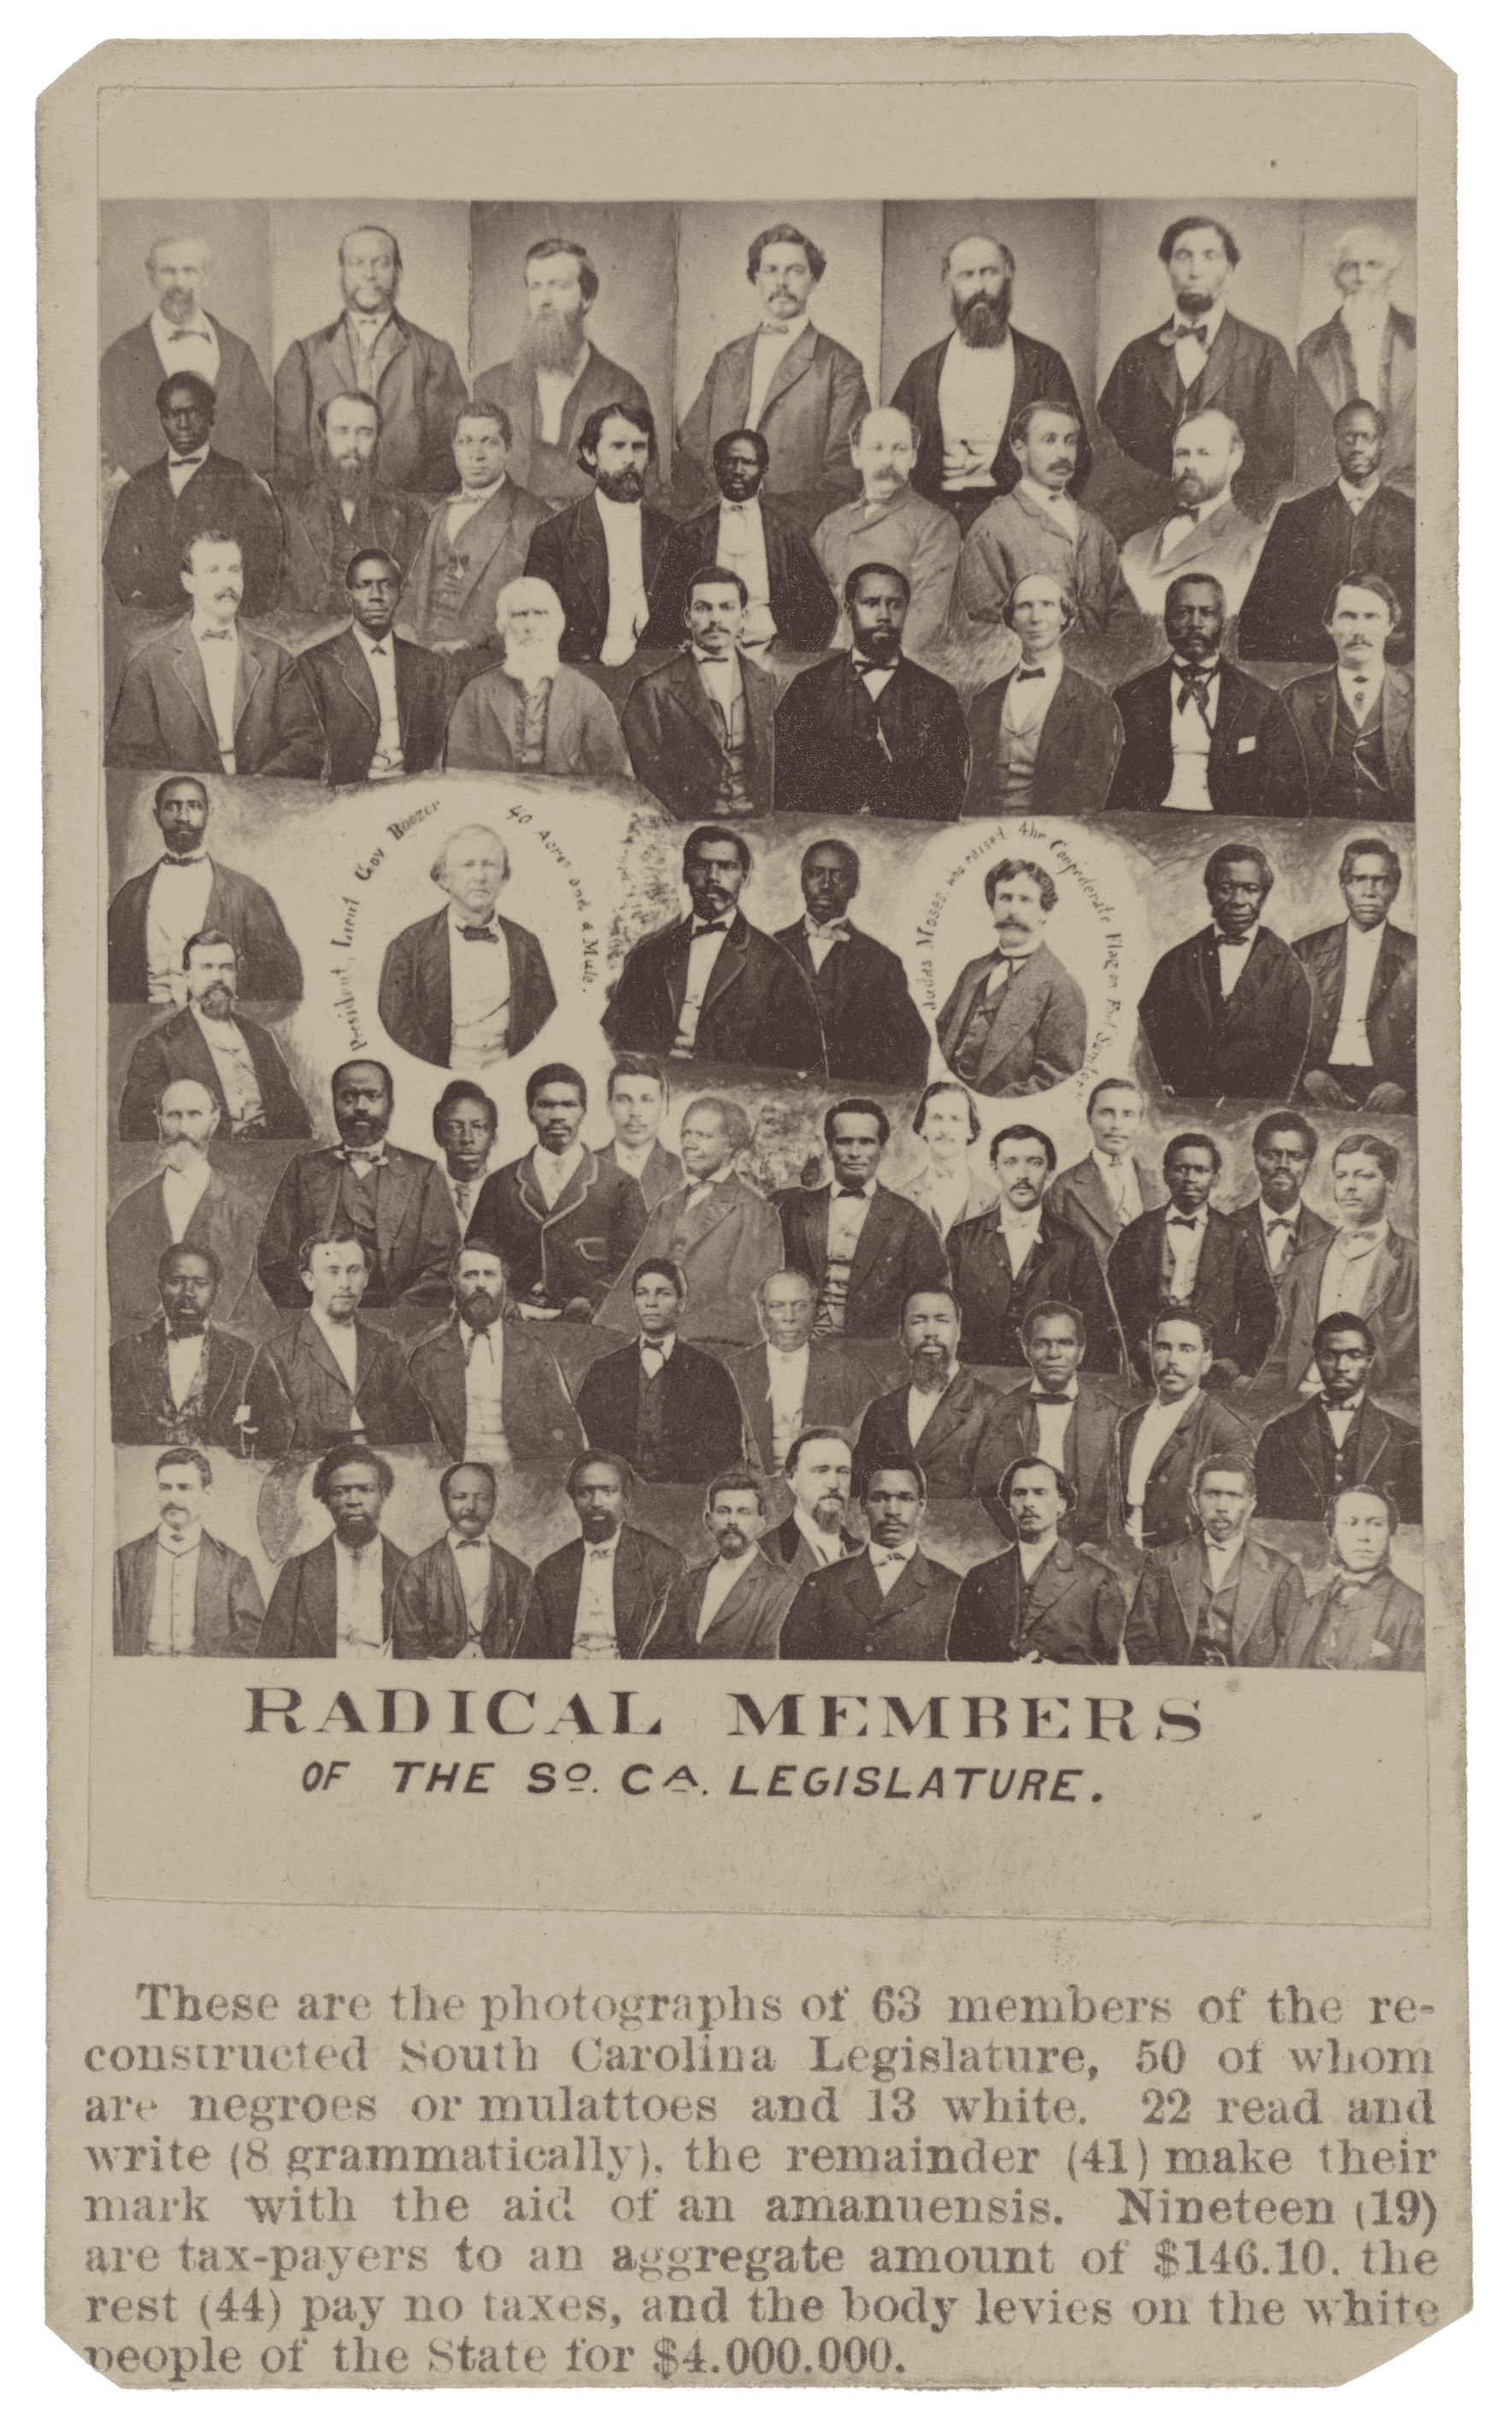 A carte-de-visite of sixty-four (64) so-called "Radical" members of the reconstructed South Carolina legislature after the Civil War. The upper portion of the carte-de-visite is a composite photograph of bust-style portraits of each Congressional member. Below the composite photograph is printed text on the card identifying fifty (50) of the members of Congress as "colored" and thirteen (13) as "white." The text incorrectly states that sixty-three (63) members are pictured. On the verso is printed text listing the names of the sixty-four (64) people depicted on the front, listed by row, "Lines from Left to Right." Some names are misspelled. All corners of the card are trimmed.